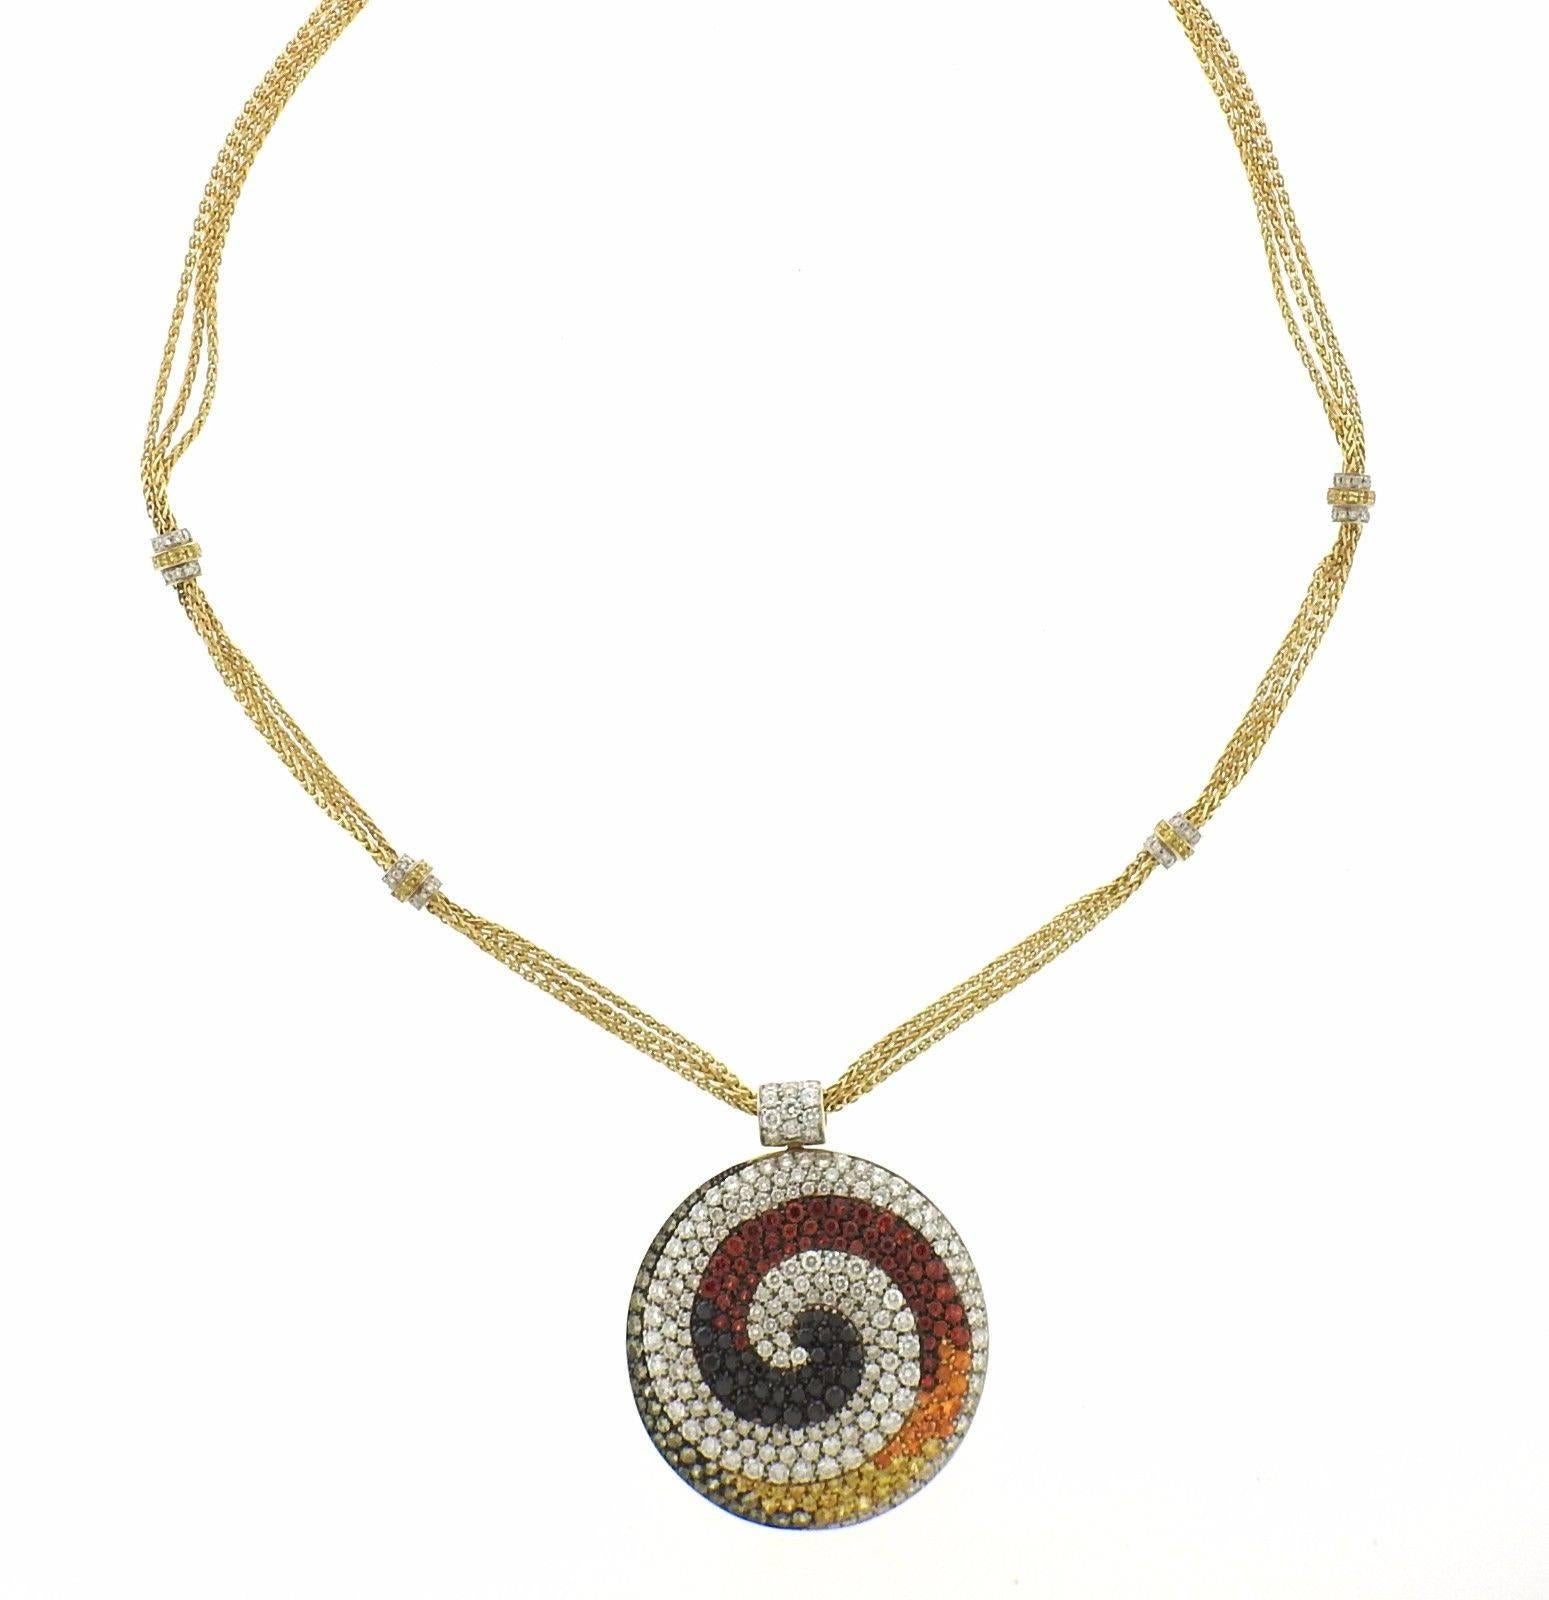 An 18k gold necklace with circle pendant, crafted by Valente, featuring multi color sapphires and approximately 3.50ctw in G/VS diamonds in a swirl design. Entire length is 21